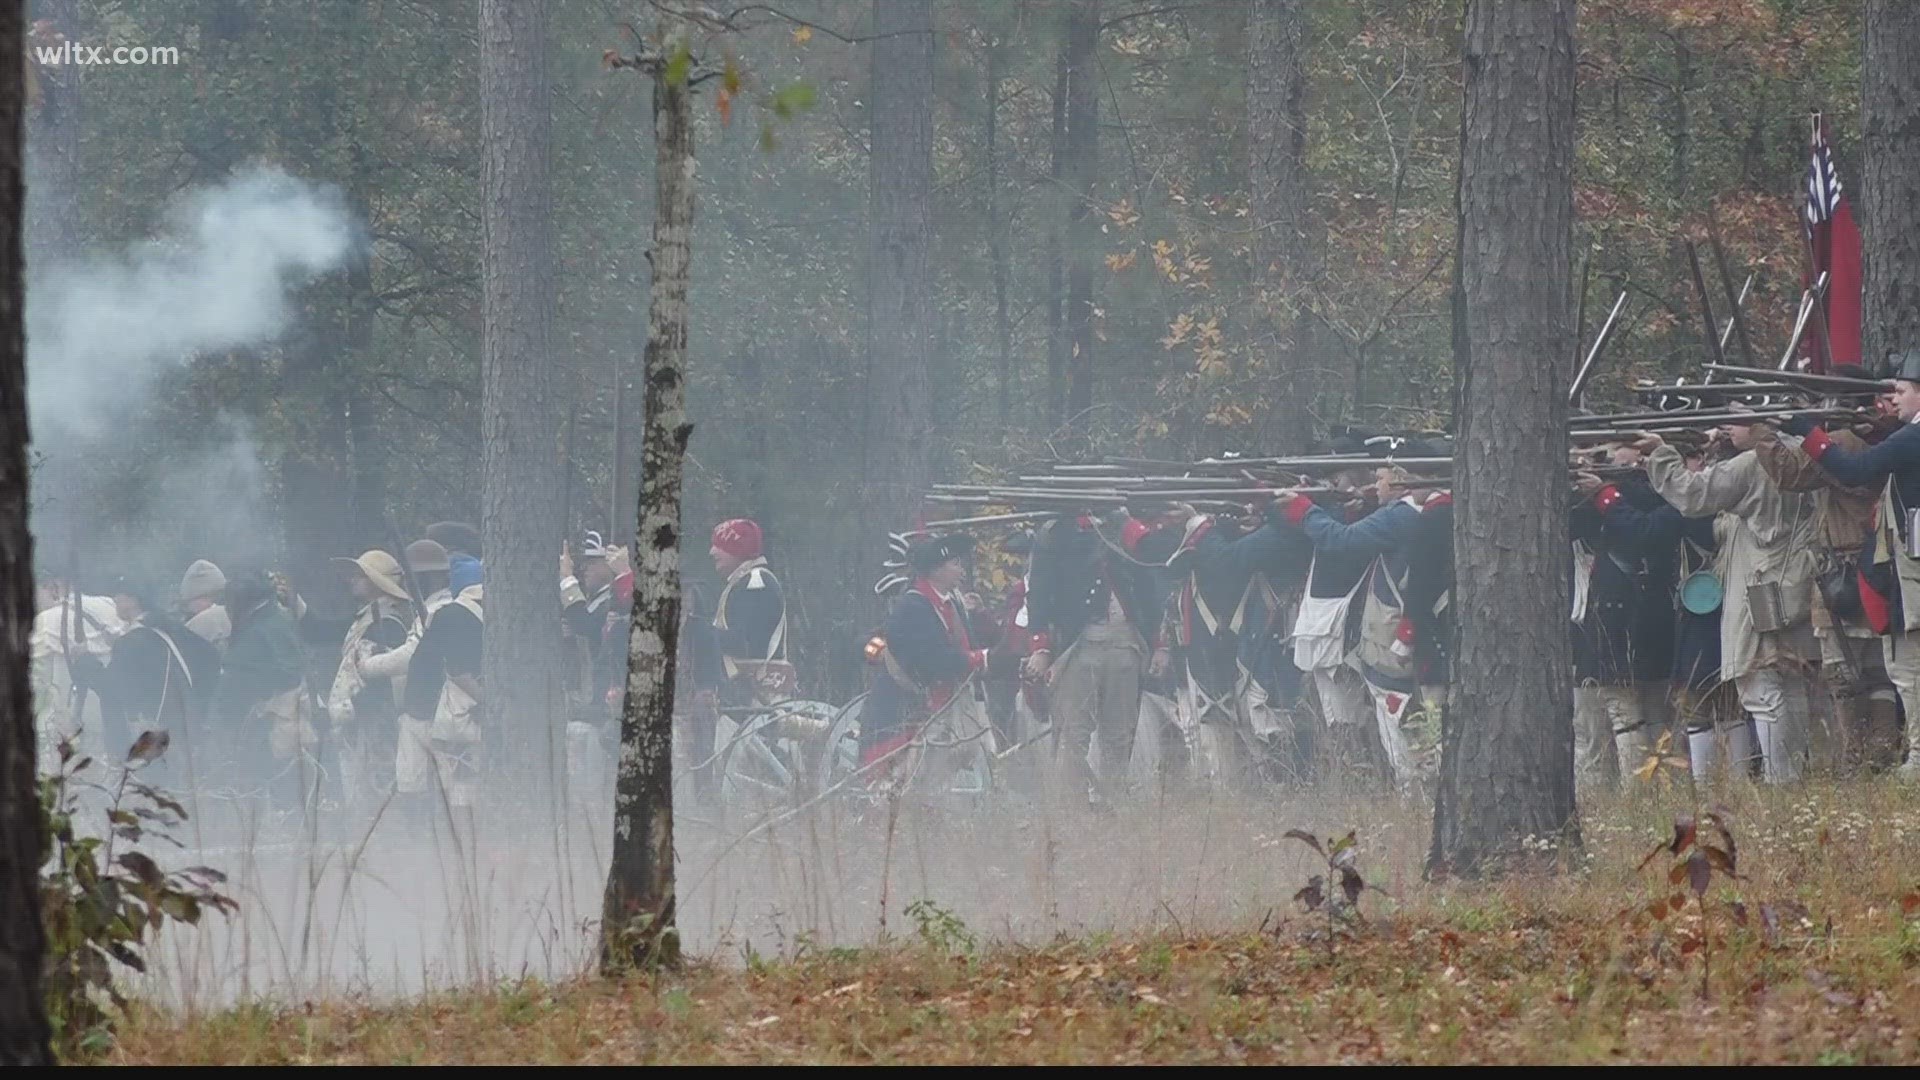 Residents reenact Battle of Camden 243 years later